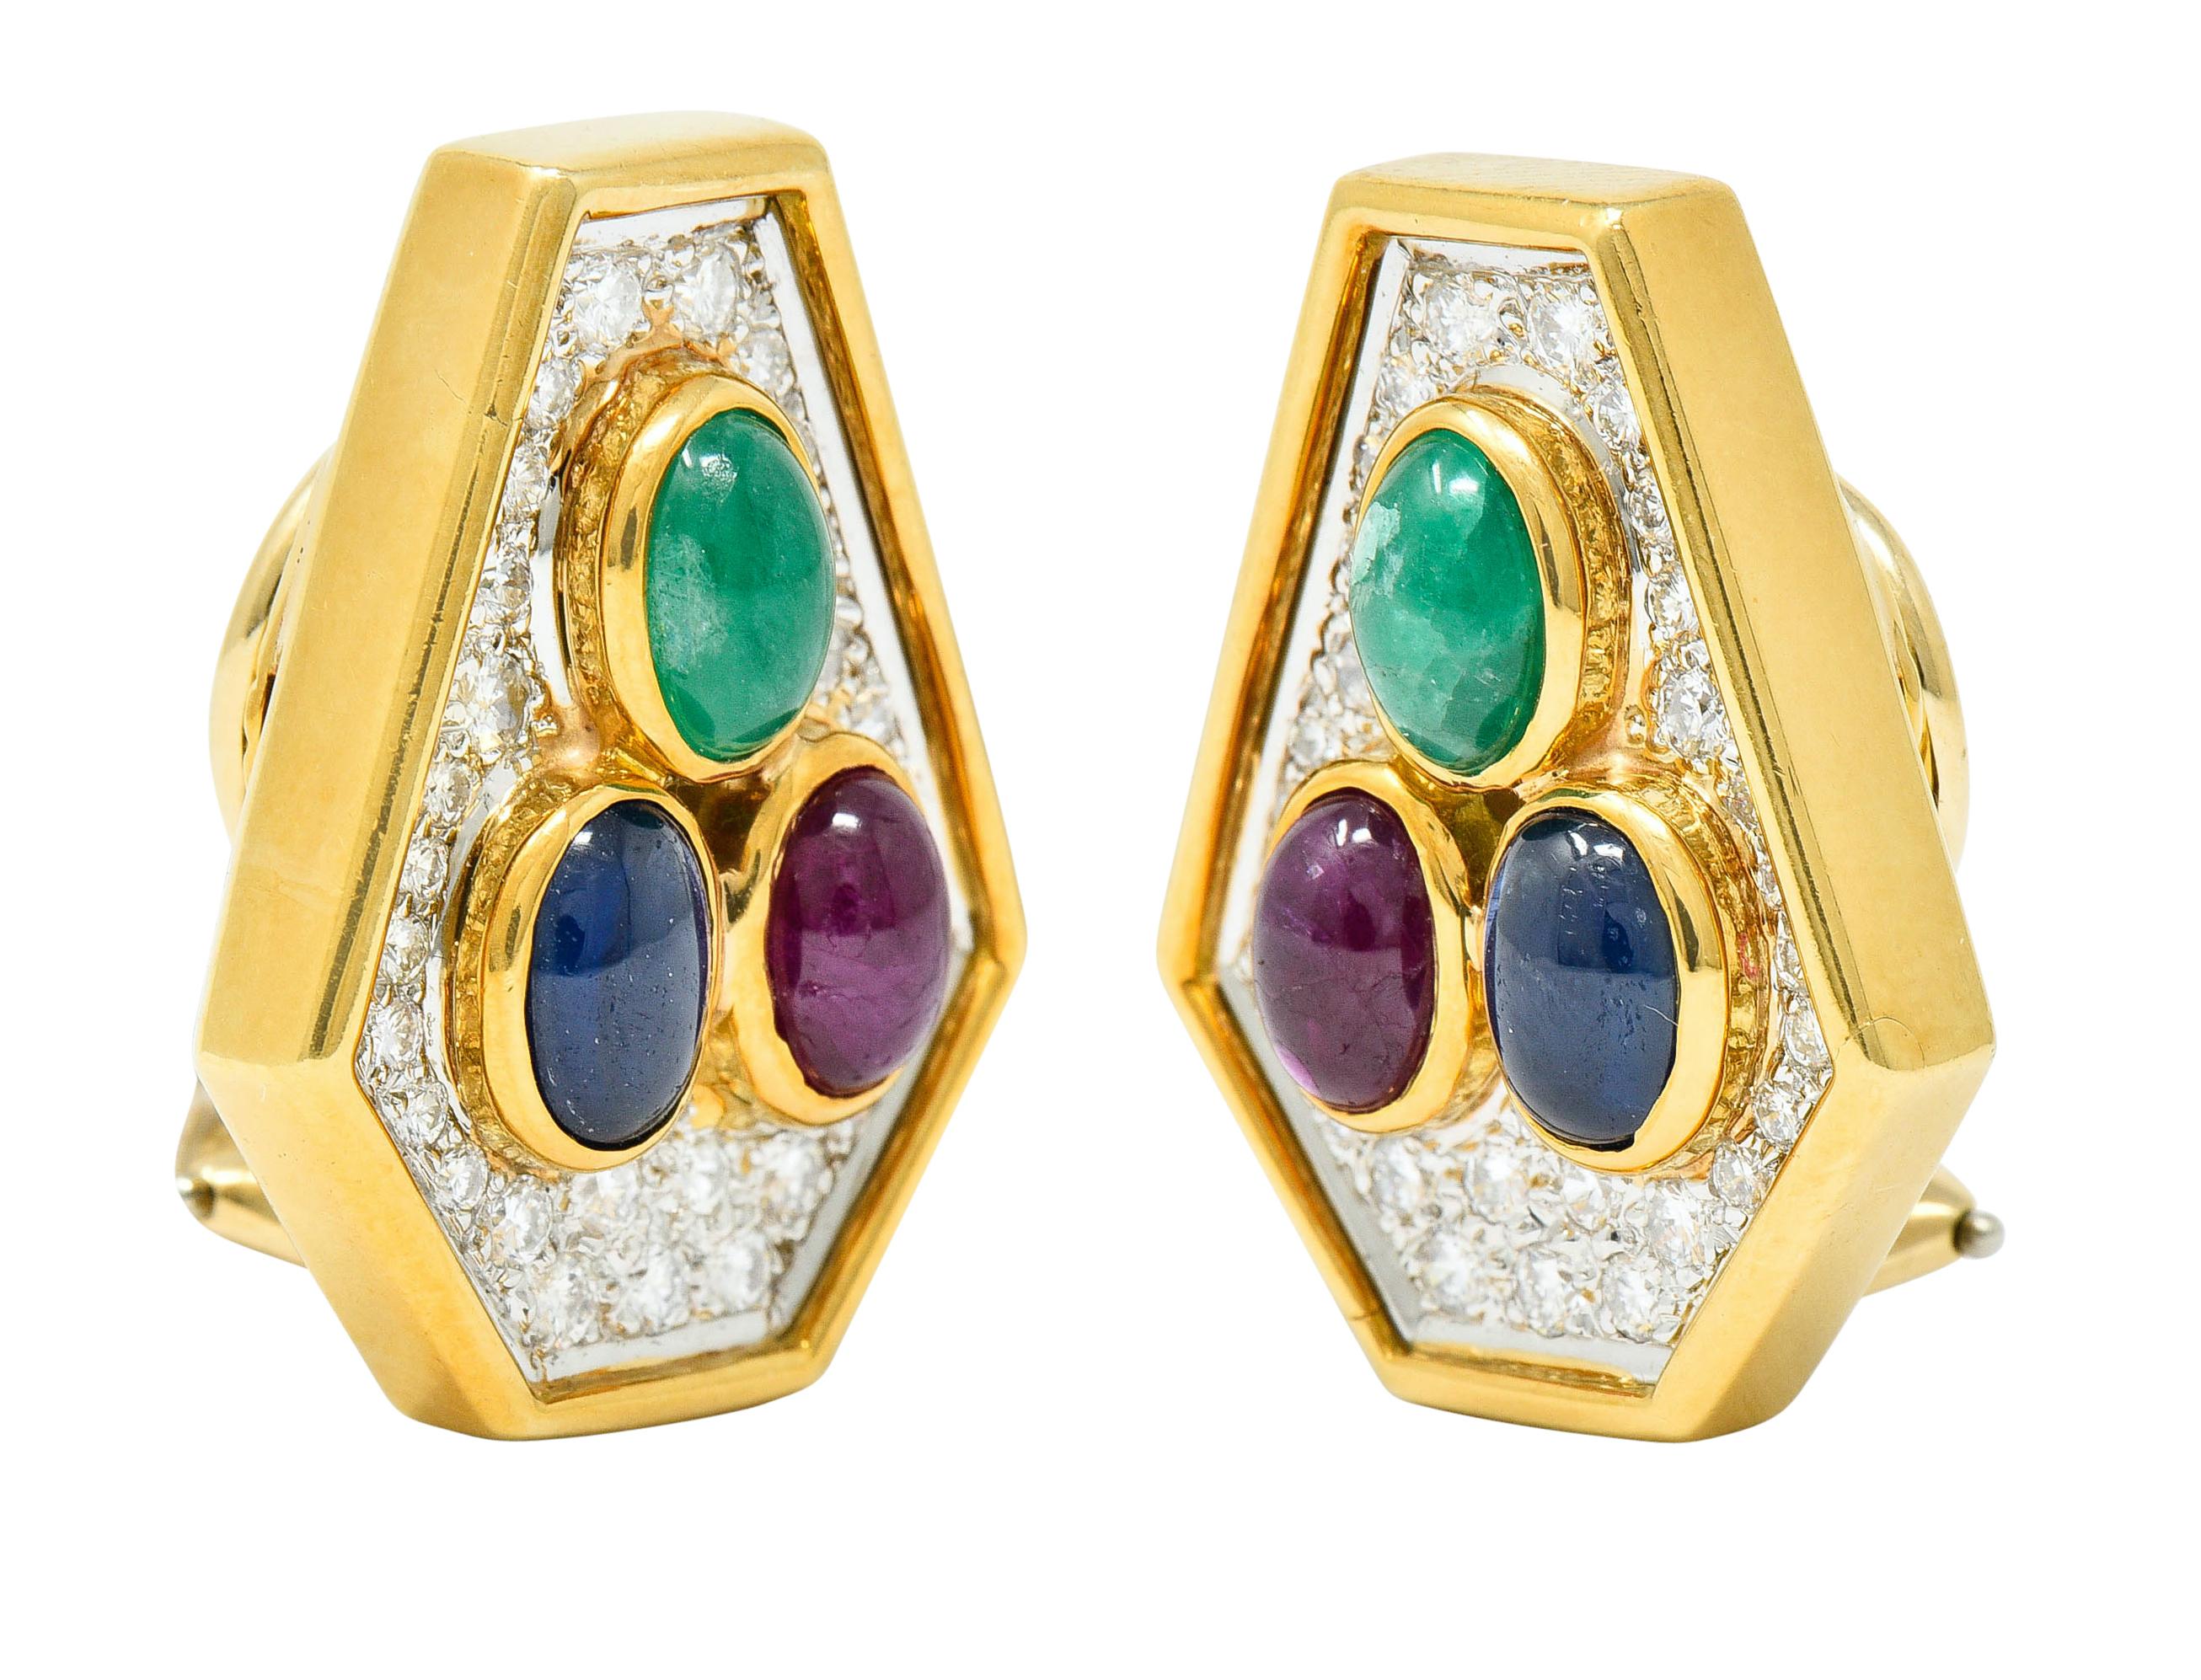 Earrings are shaped as elongated hexagons centering a triad of bezel set cabochons

Rubies, sapphires, and emeralds are brightly colored and weigh in total approximately 3.55 carats

Surrounded by a recessed halo of round brilliant cut diamonds,